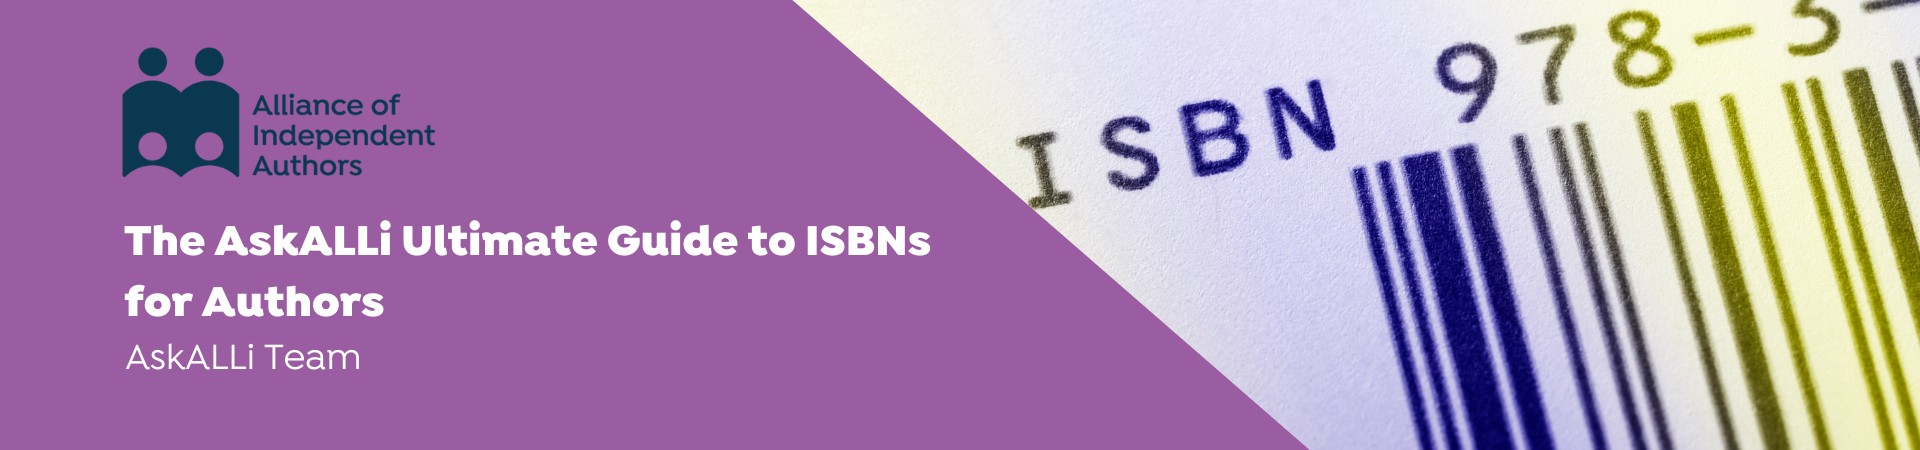 The AskALLi Ultimate Guide To ISBNs For Authors